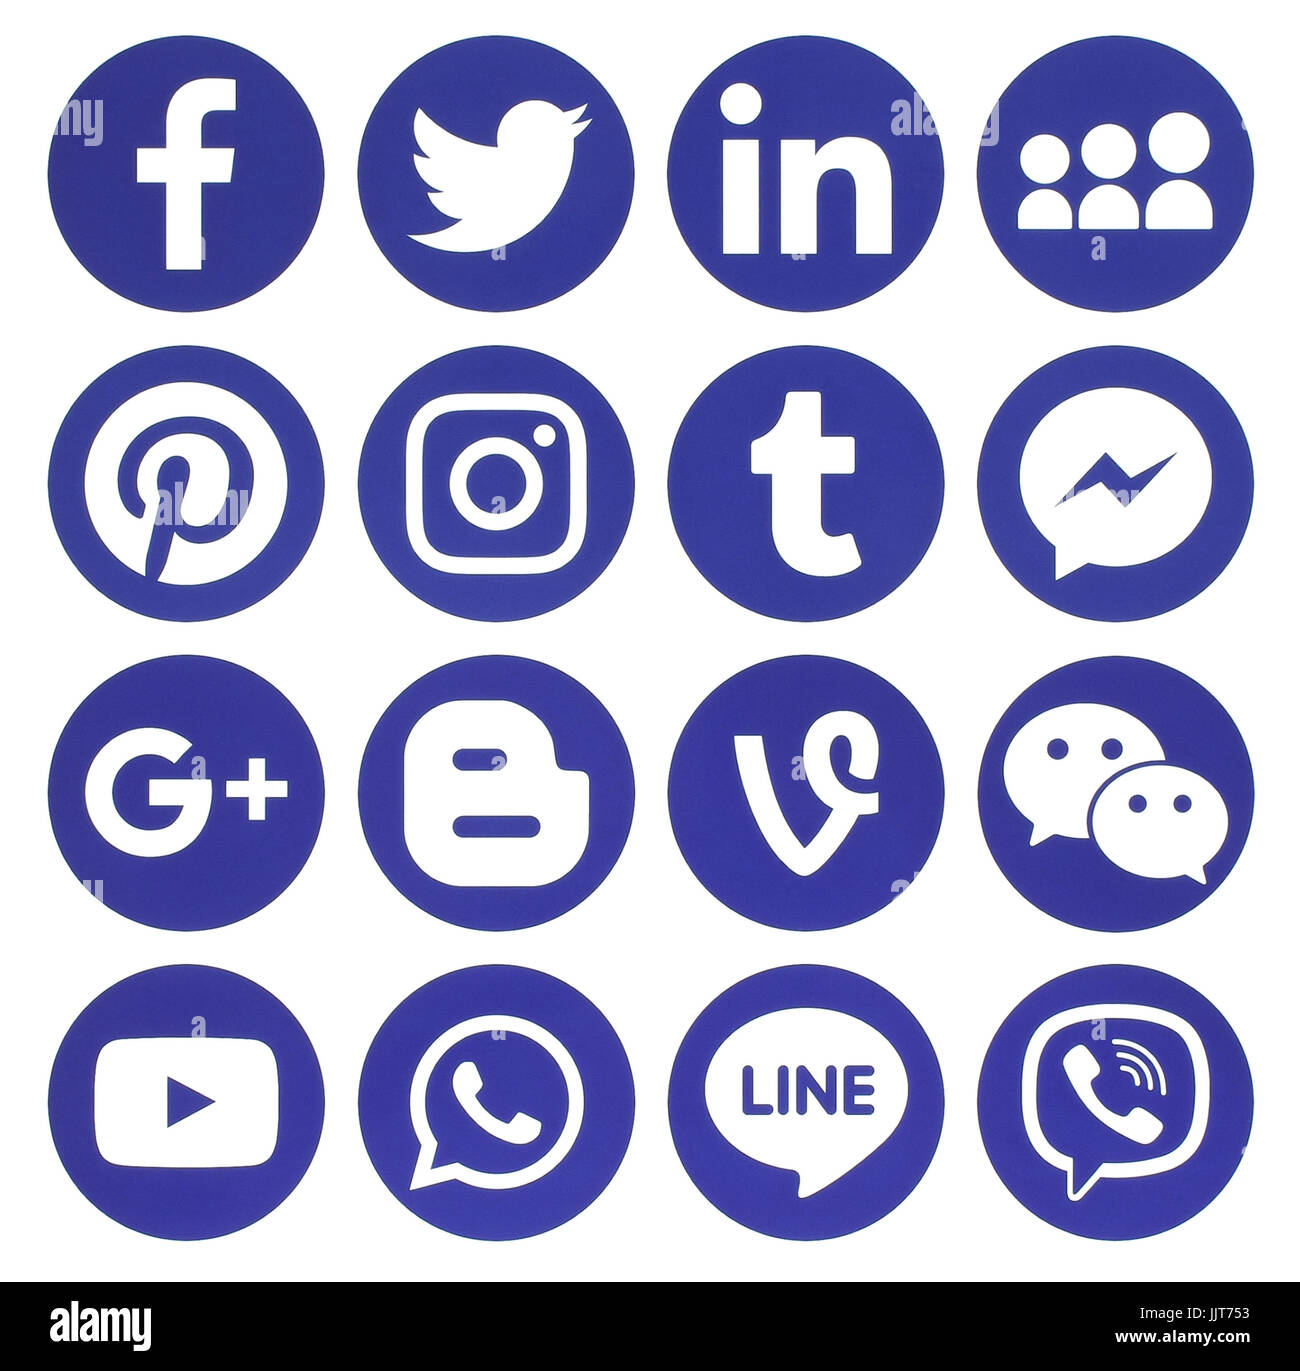 Kiev, Ukraine - February 13, 2017: Collection of popular blue round social media icons, printed on paper: Facebook, Twitter, Google Plus, Instagram, P Stock Photo